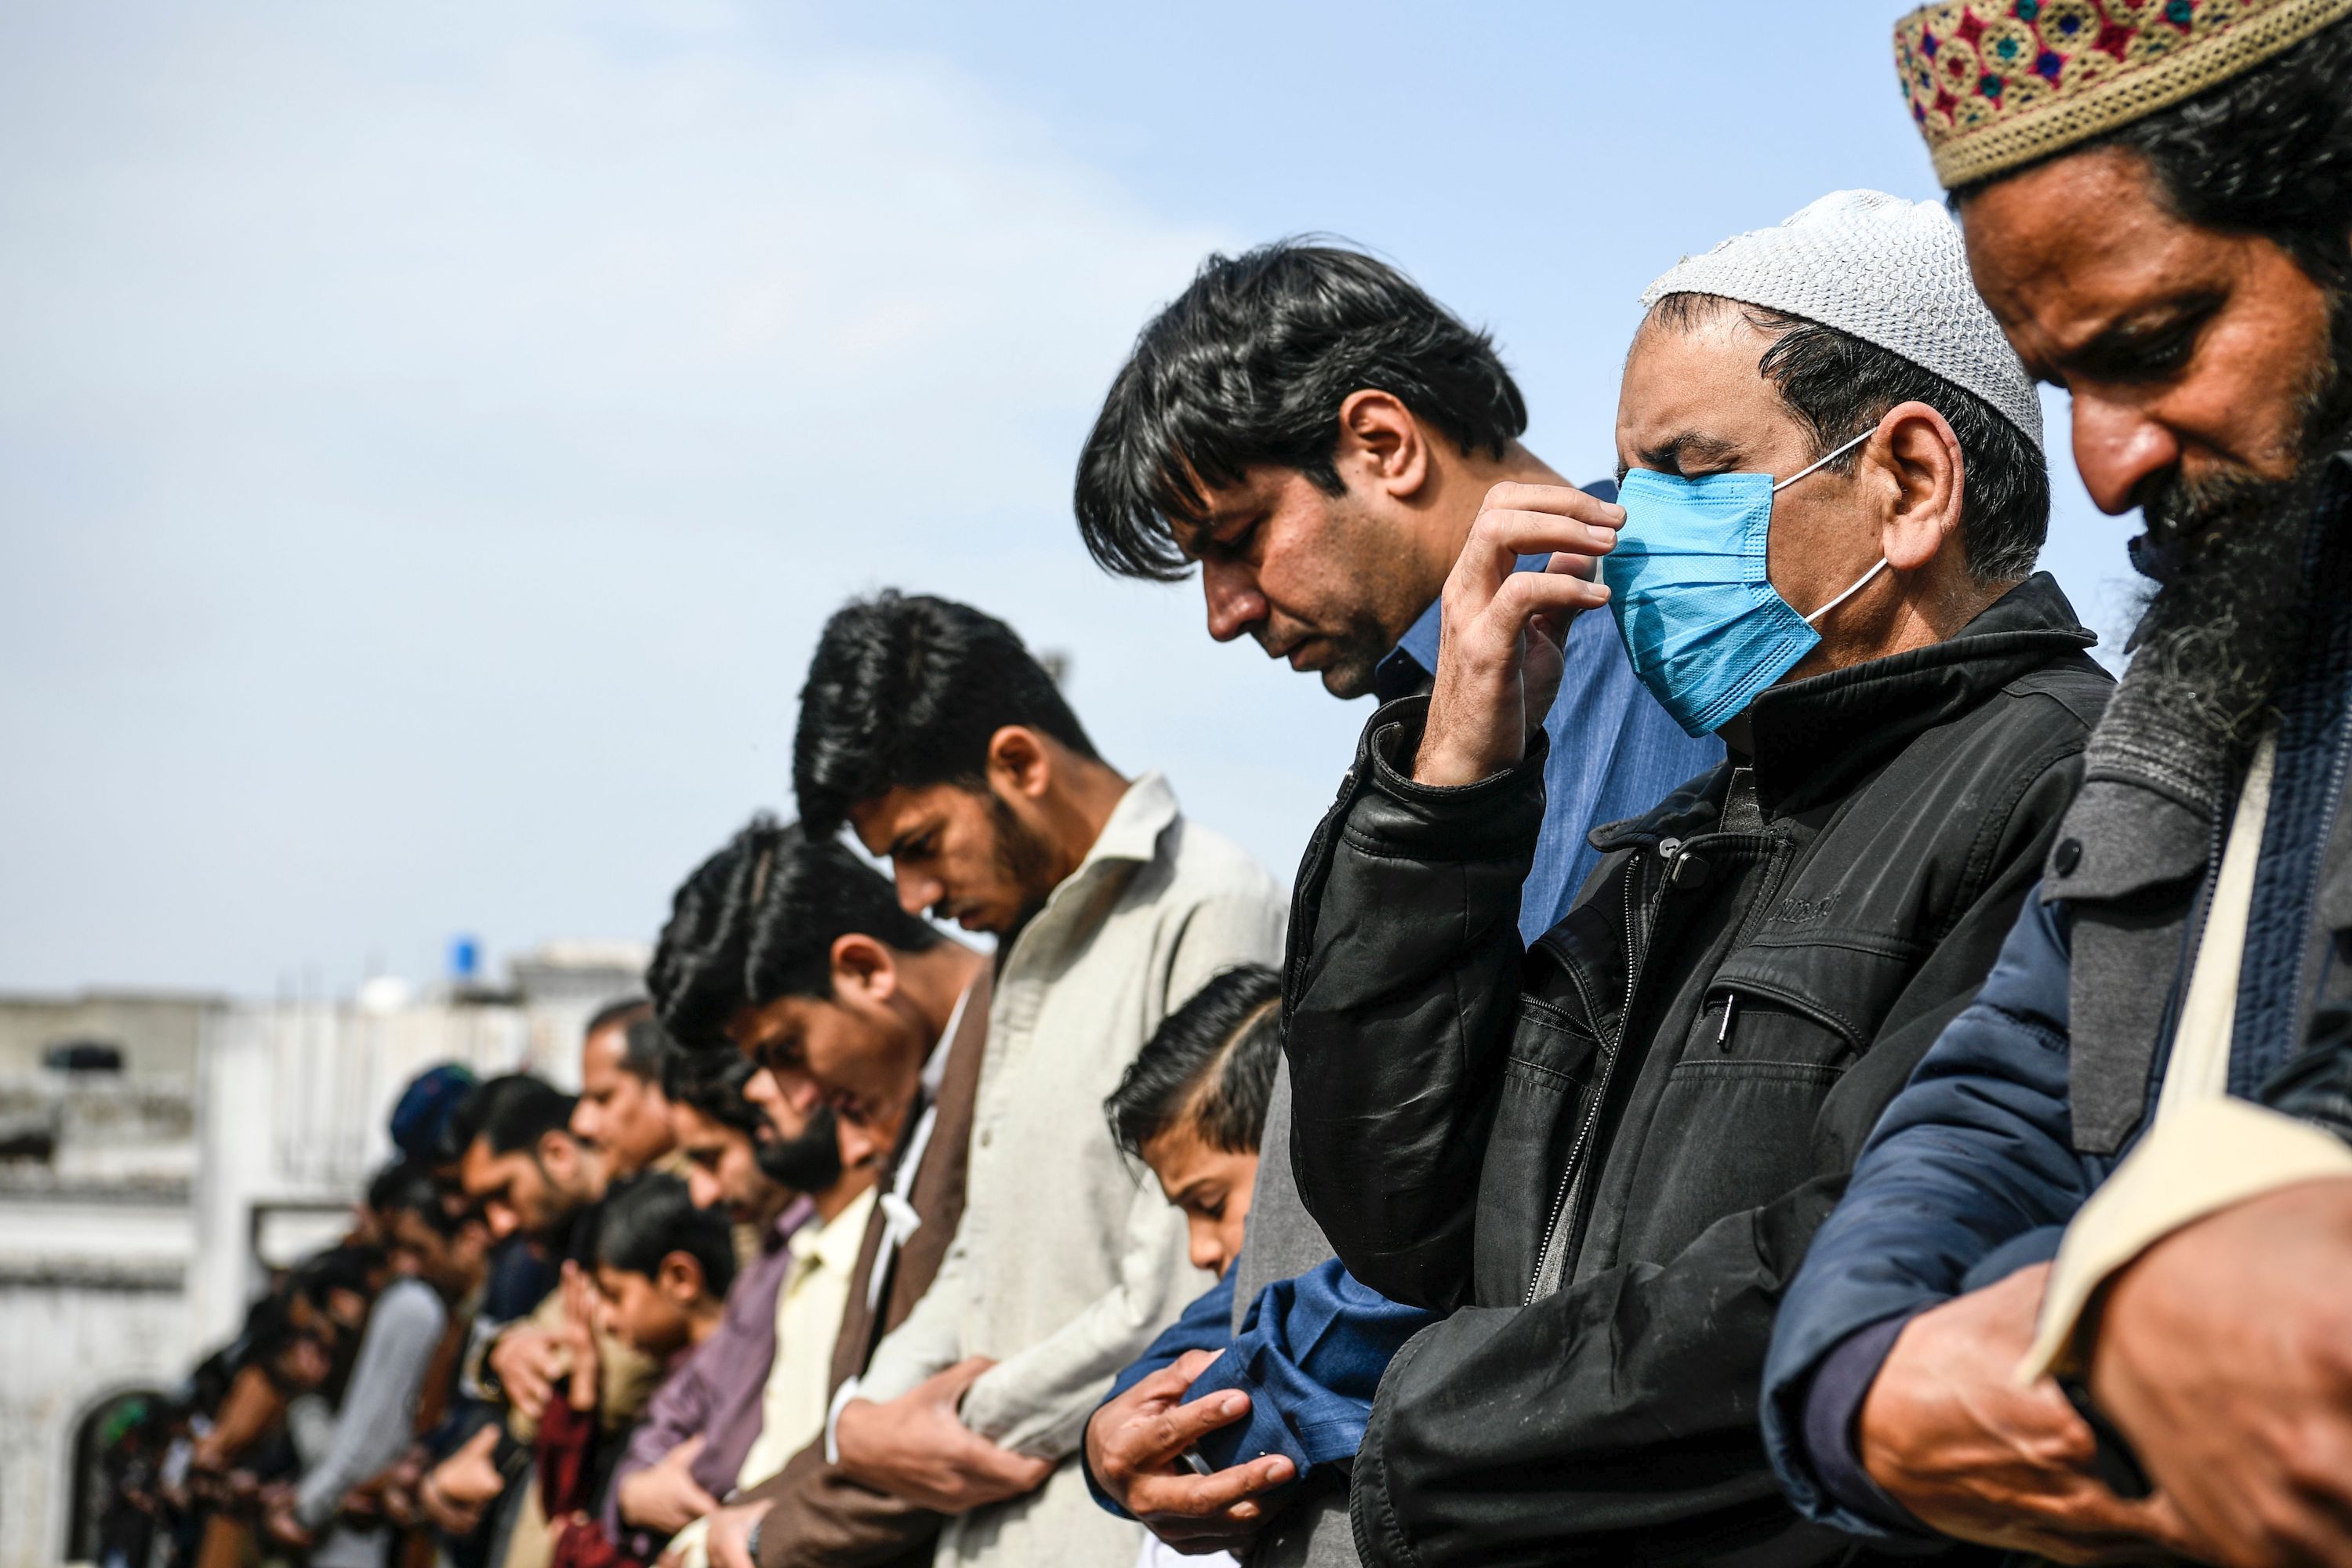 A resident (R) wearing a facemask as a preventive measure against the spread of the COVID-19 coronavirus offers Friday prayers along with other Muslims at a mosque in Rawalpindi on March 13, 2020. (Aamir Qureshi
                      —AFP/Getty Images)